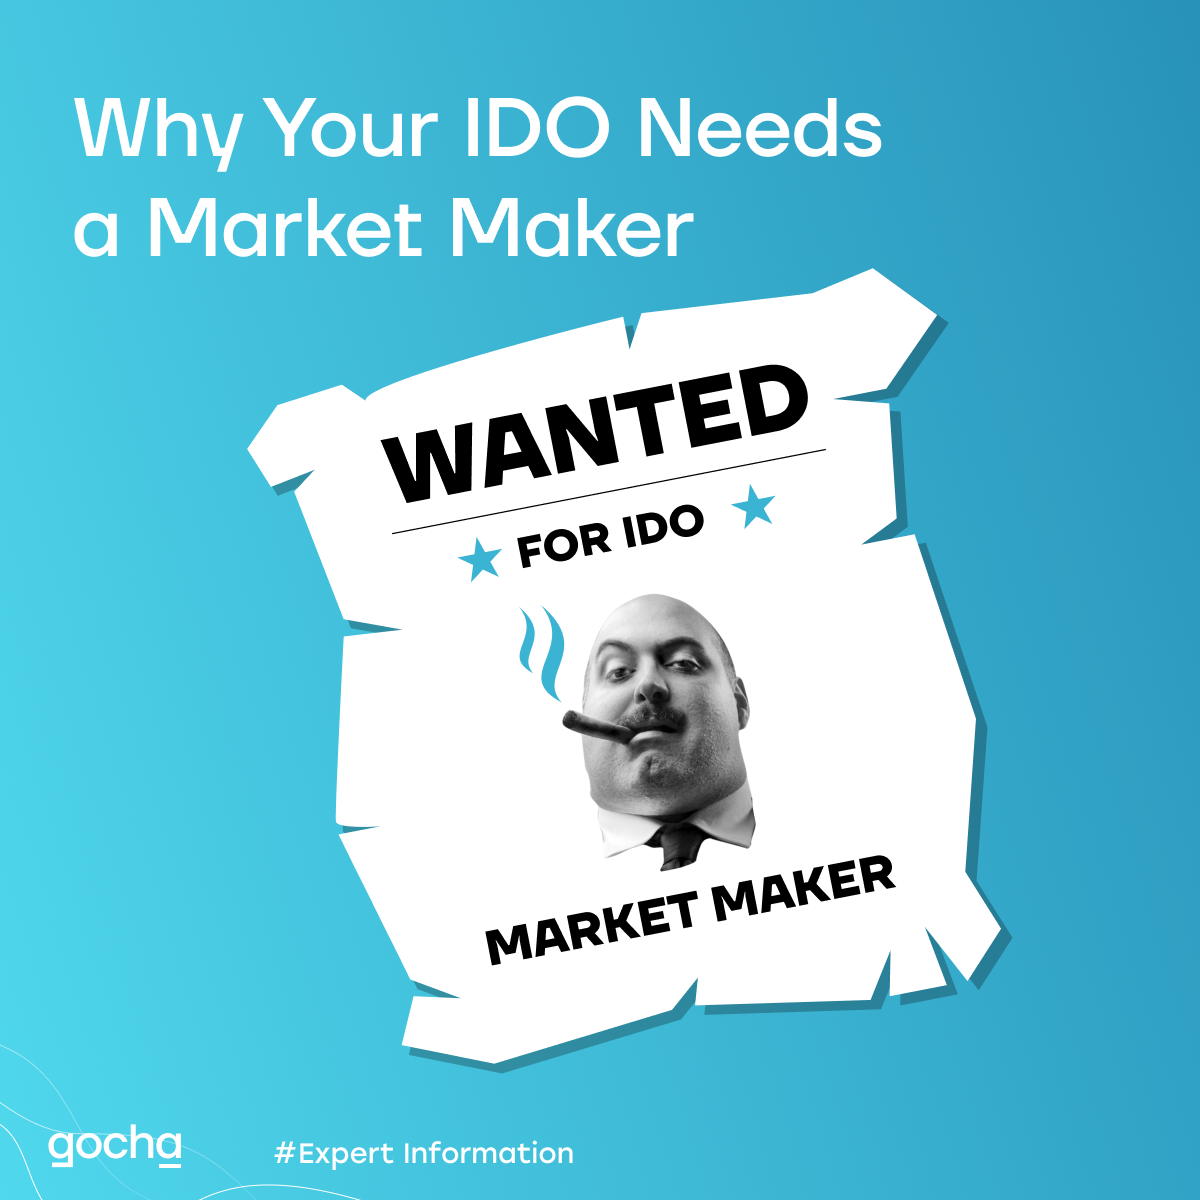 Why Your IDO Needs a Market Maker